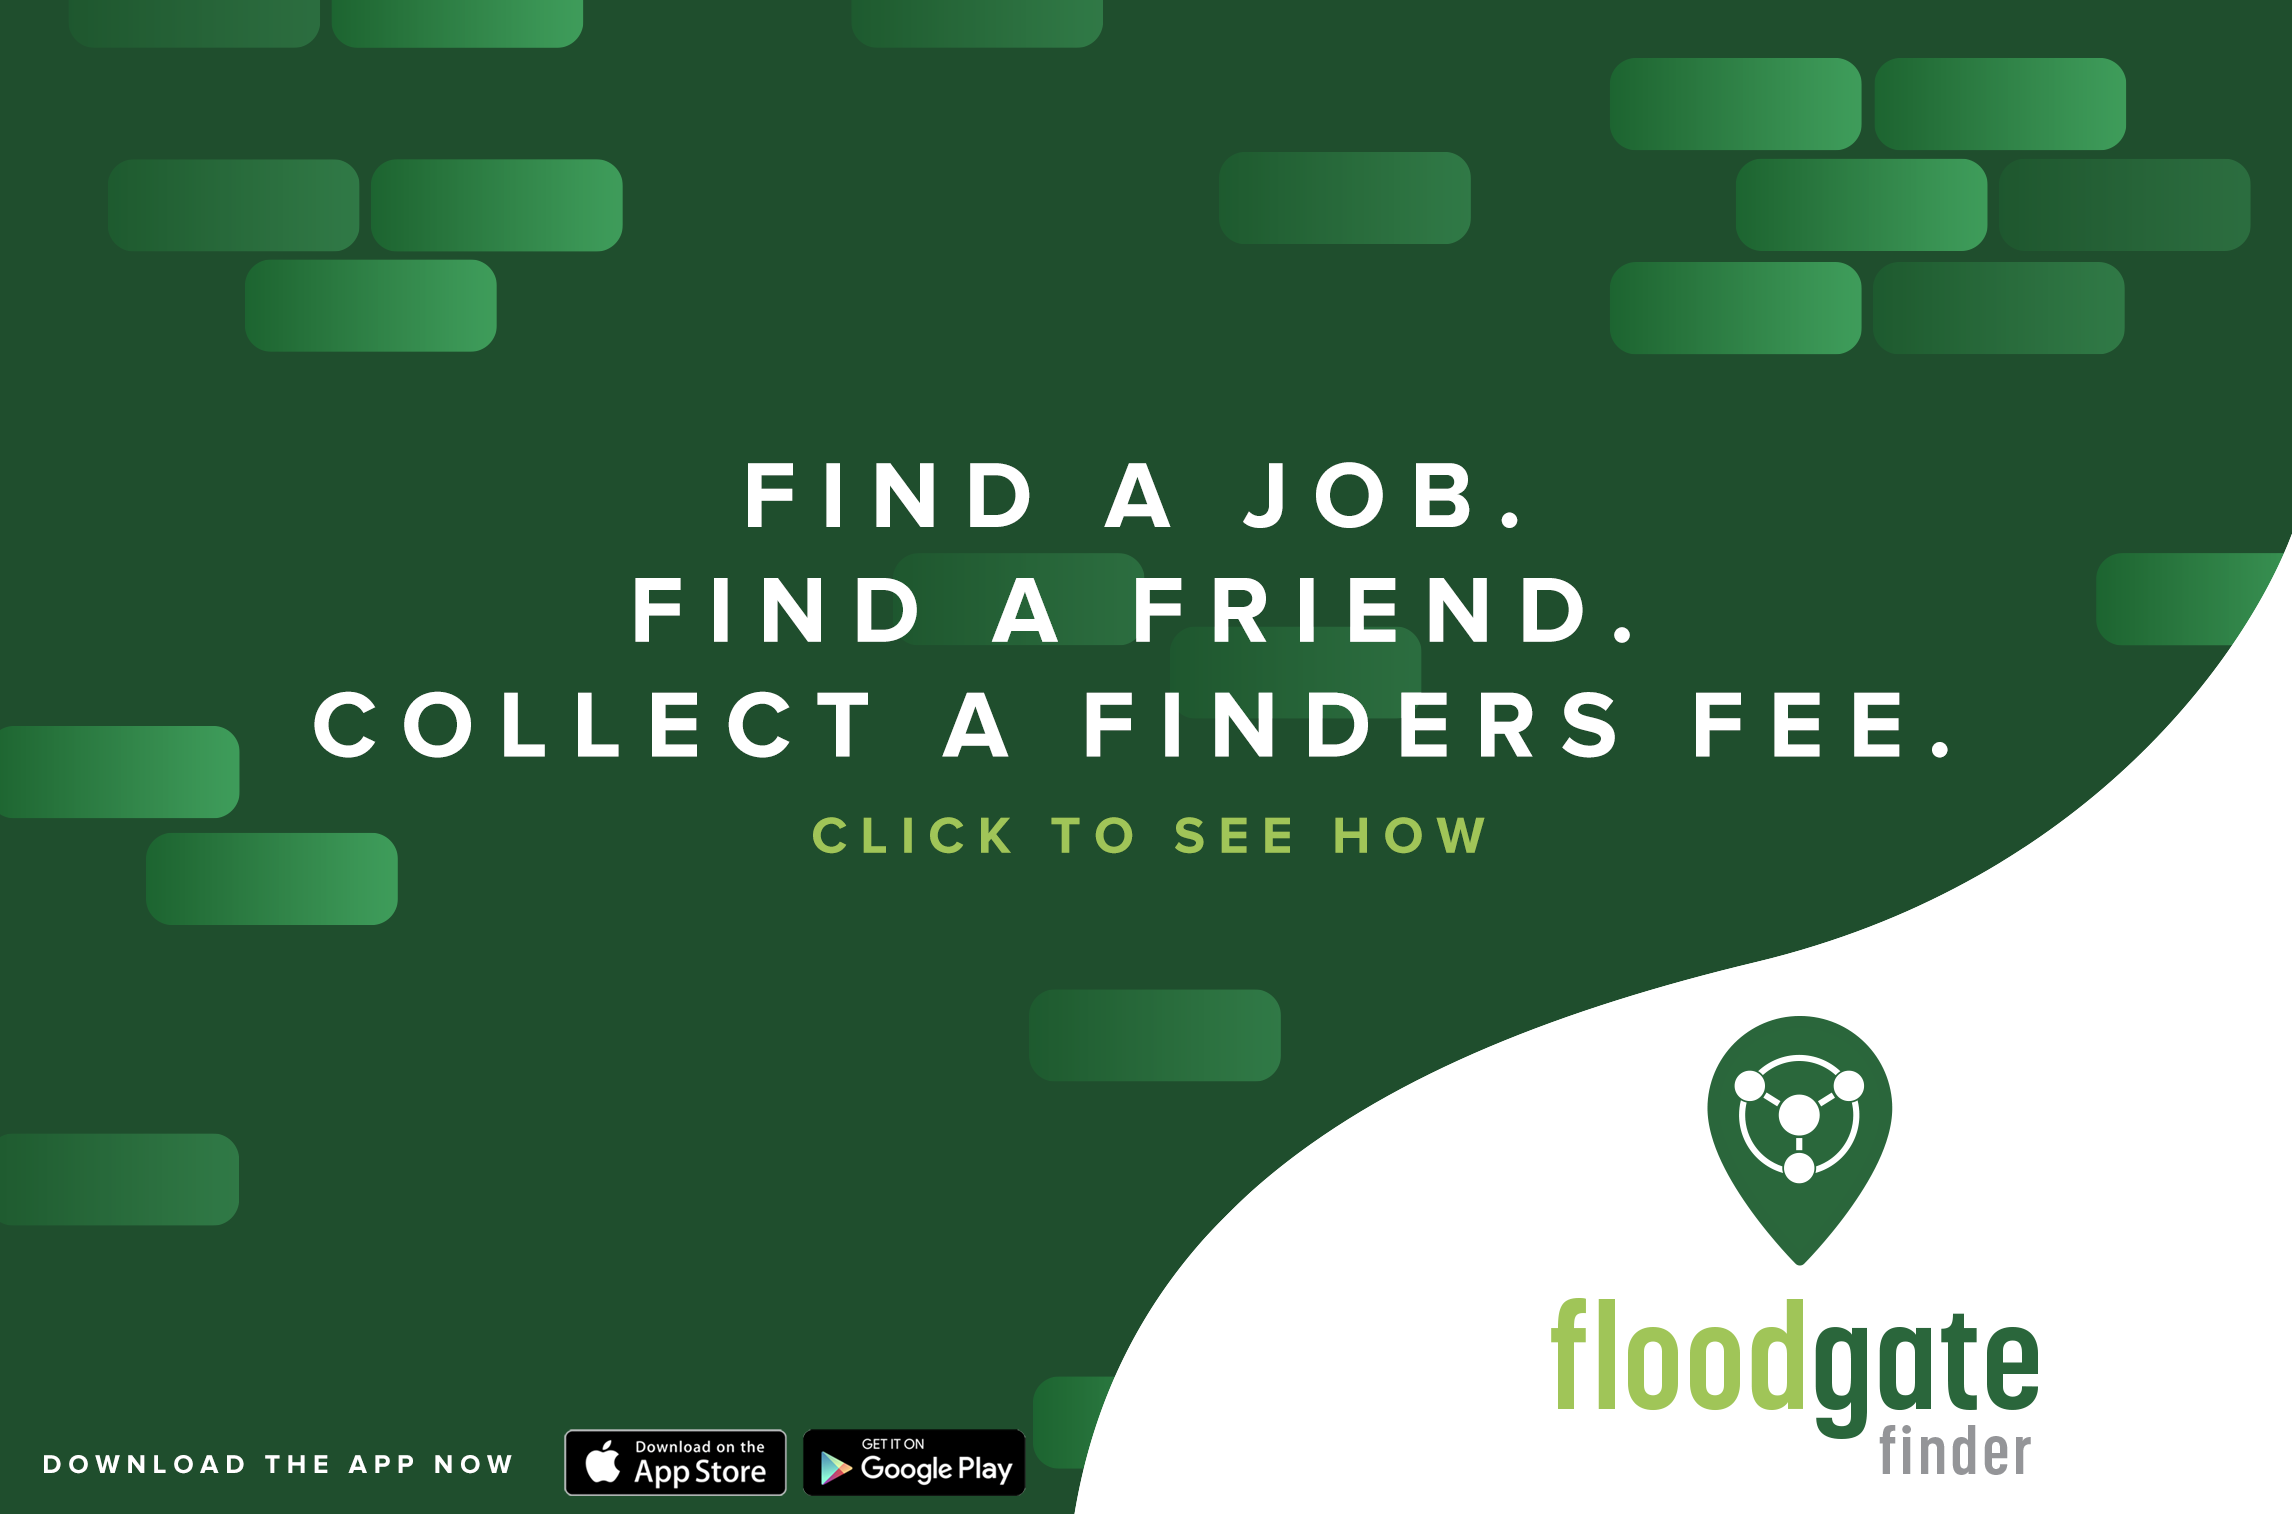 FloodGate Medical Launches First Ever Referral Program App for the Medical Device Industry, FloodGate Finder